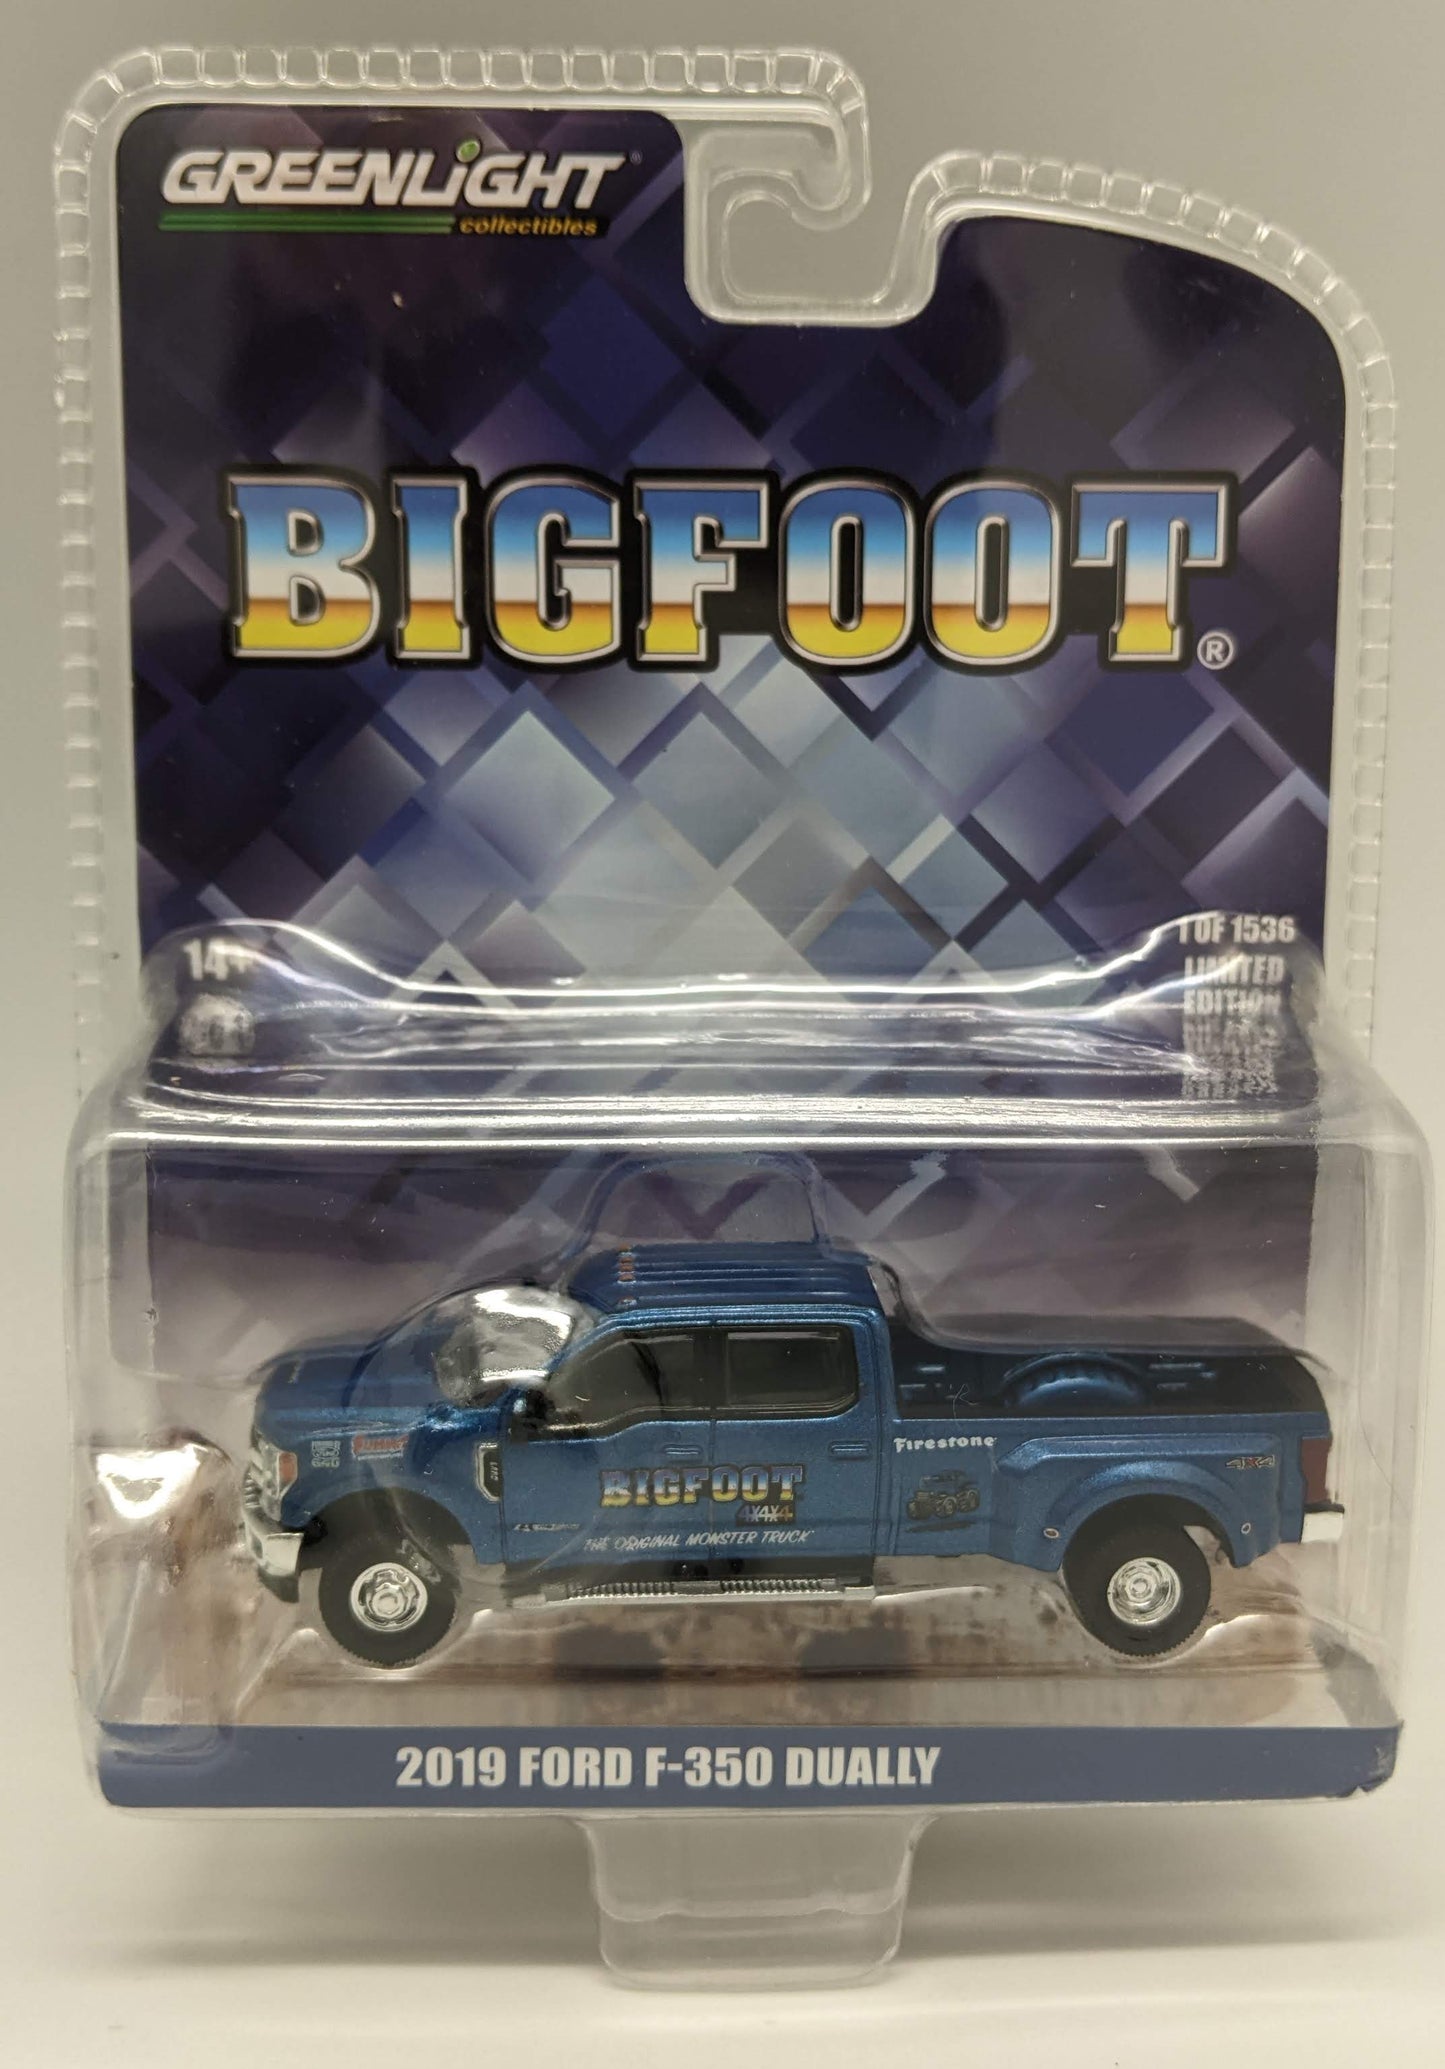 GL - 2019 **PAIR** of BIGFOOT Ford F350 Dually